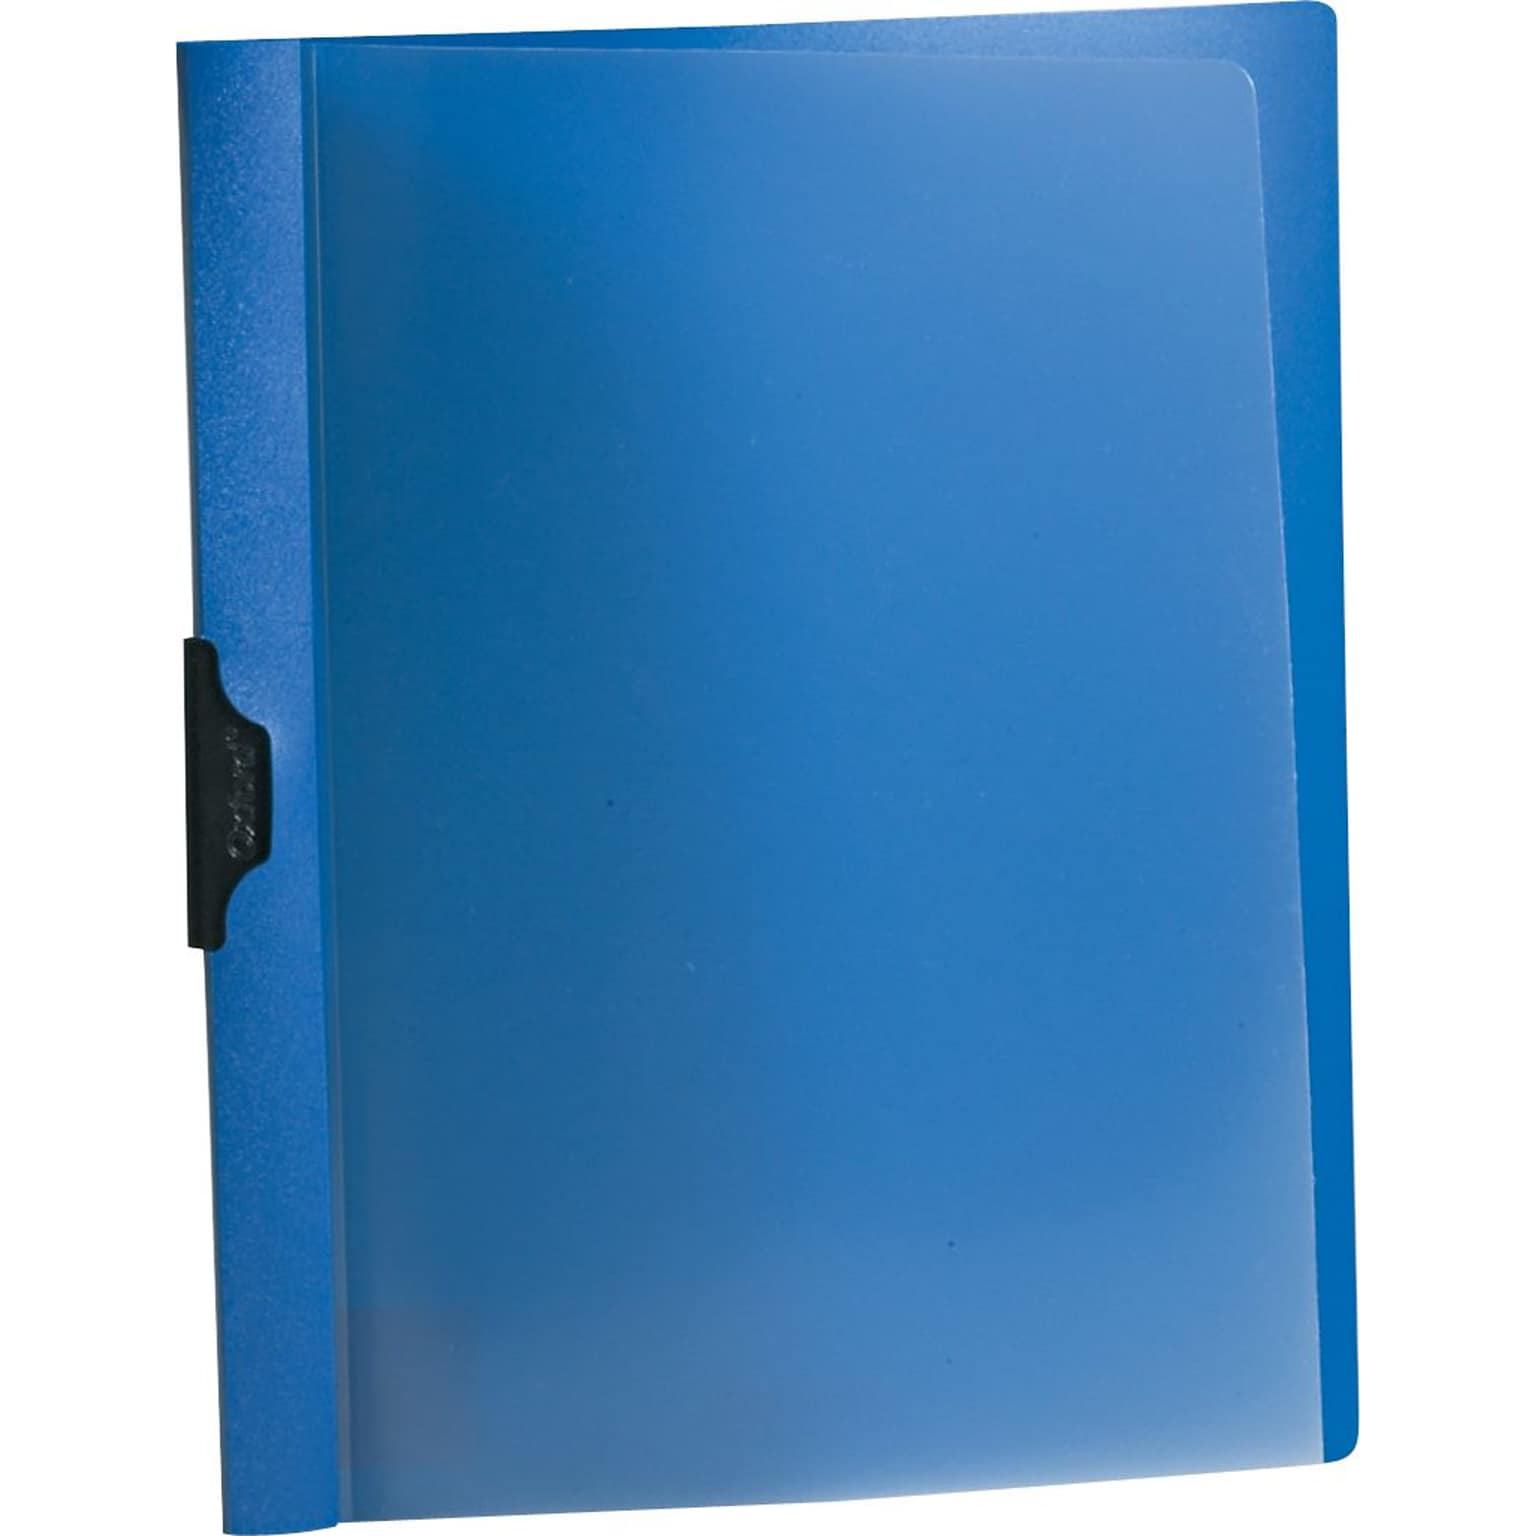 Oxford Ready Clip™ No-Punch Report Covers, Dark Blue, 8 1/2 x 11